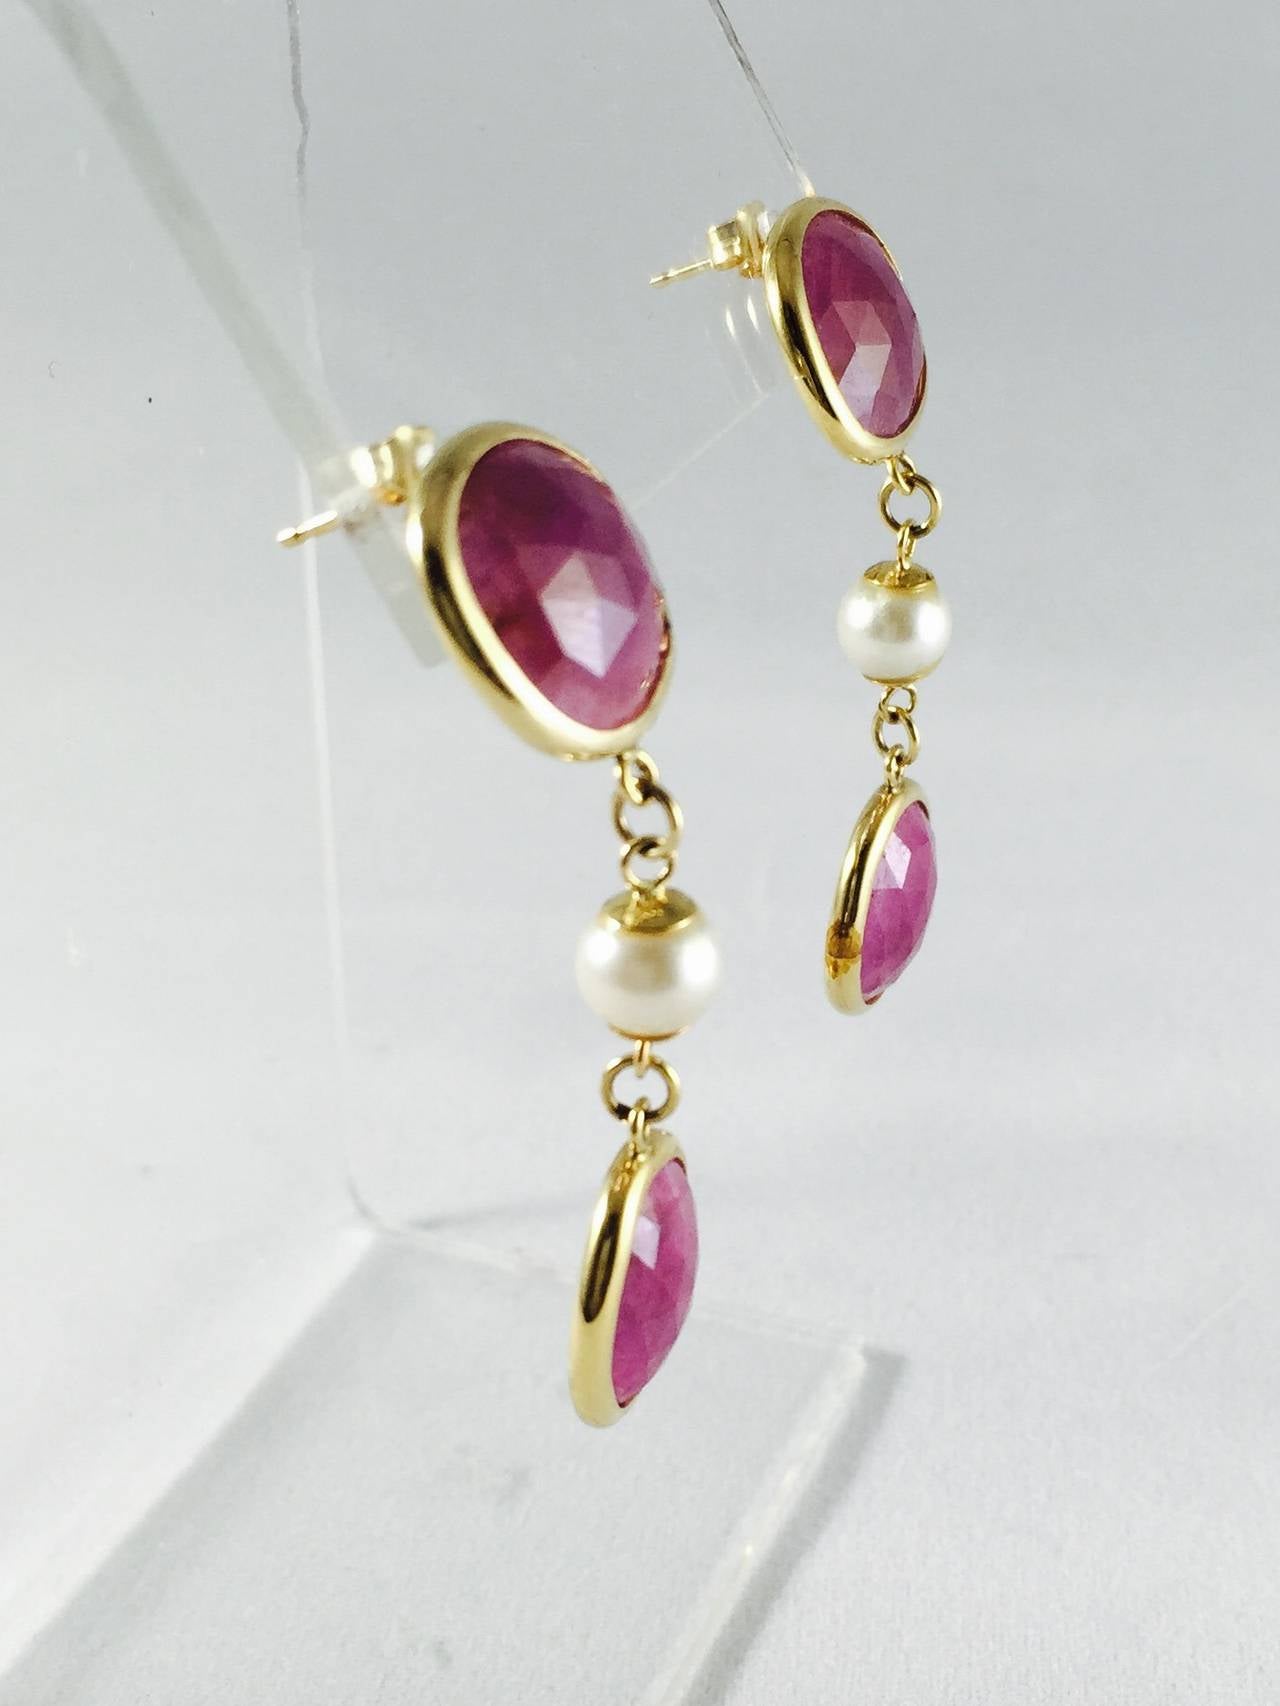 Beautifully made drop earring fabricated from 14 karat yellow gold featuring bezel set checkerboard faceted rubies.  Between each ruby sits perfectly matched lustrous cultured pearls.  These earrings dance with your every move making them incredibly